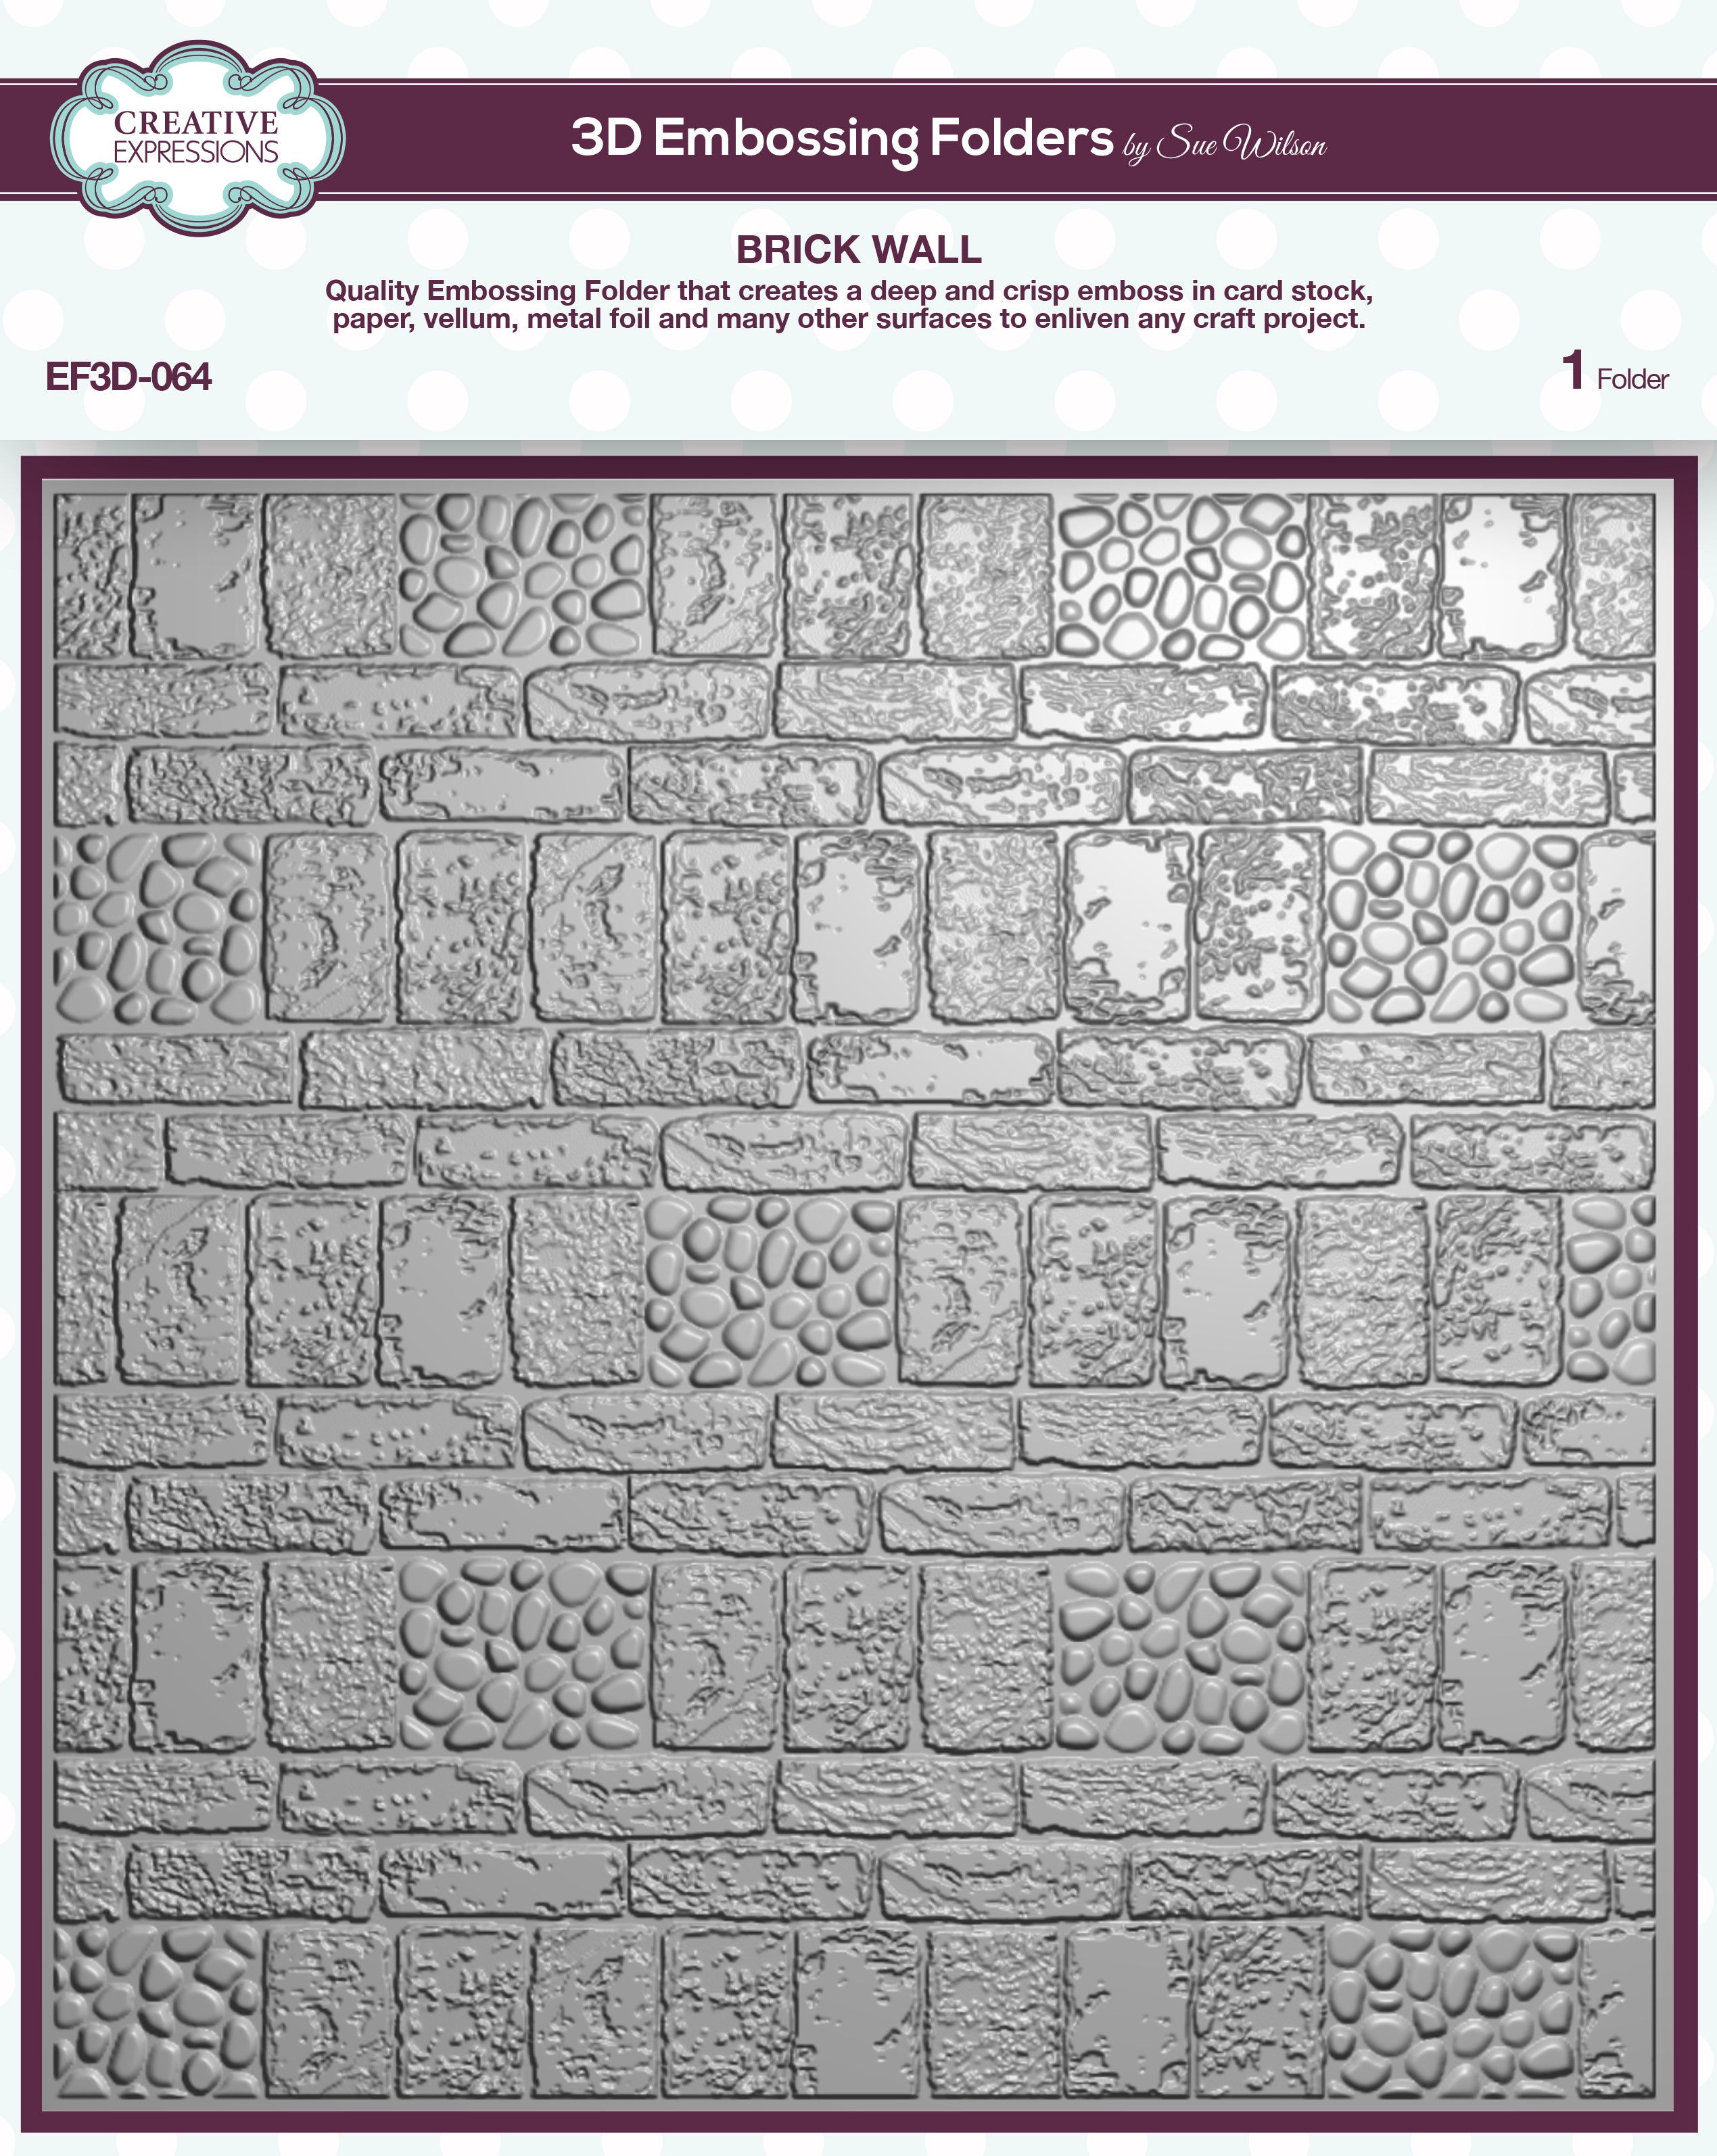 Creative Expressions Brick Wall 8 in x 8 in 3D Embossing Folder